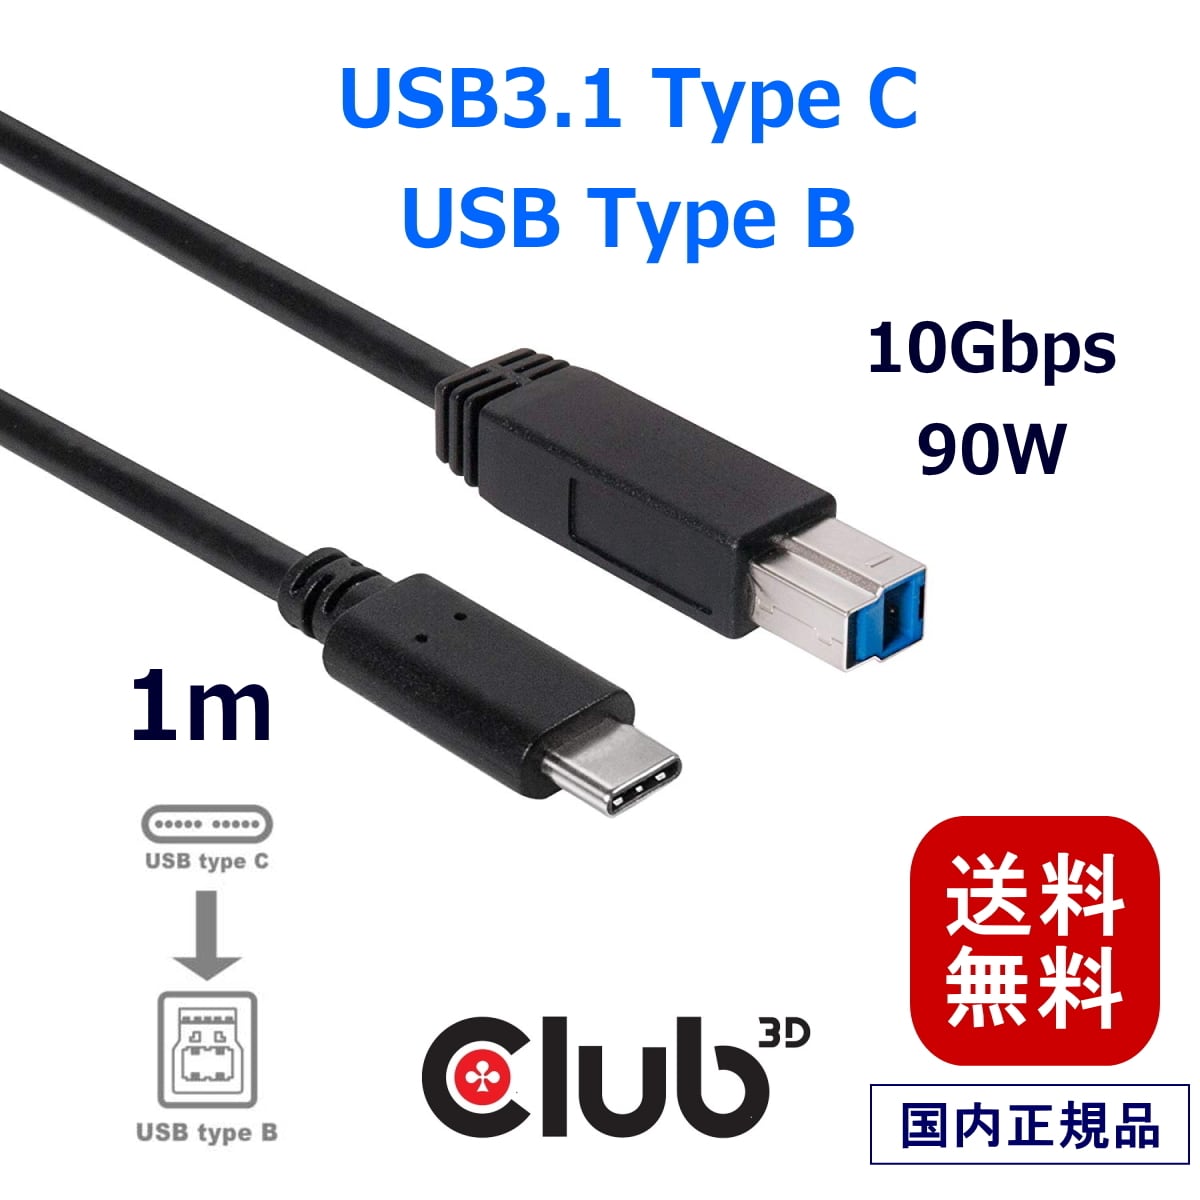 CAC-1524】Club3D USB 3.1 Type-C to Type-B Cable |